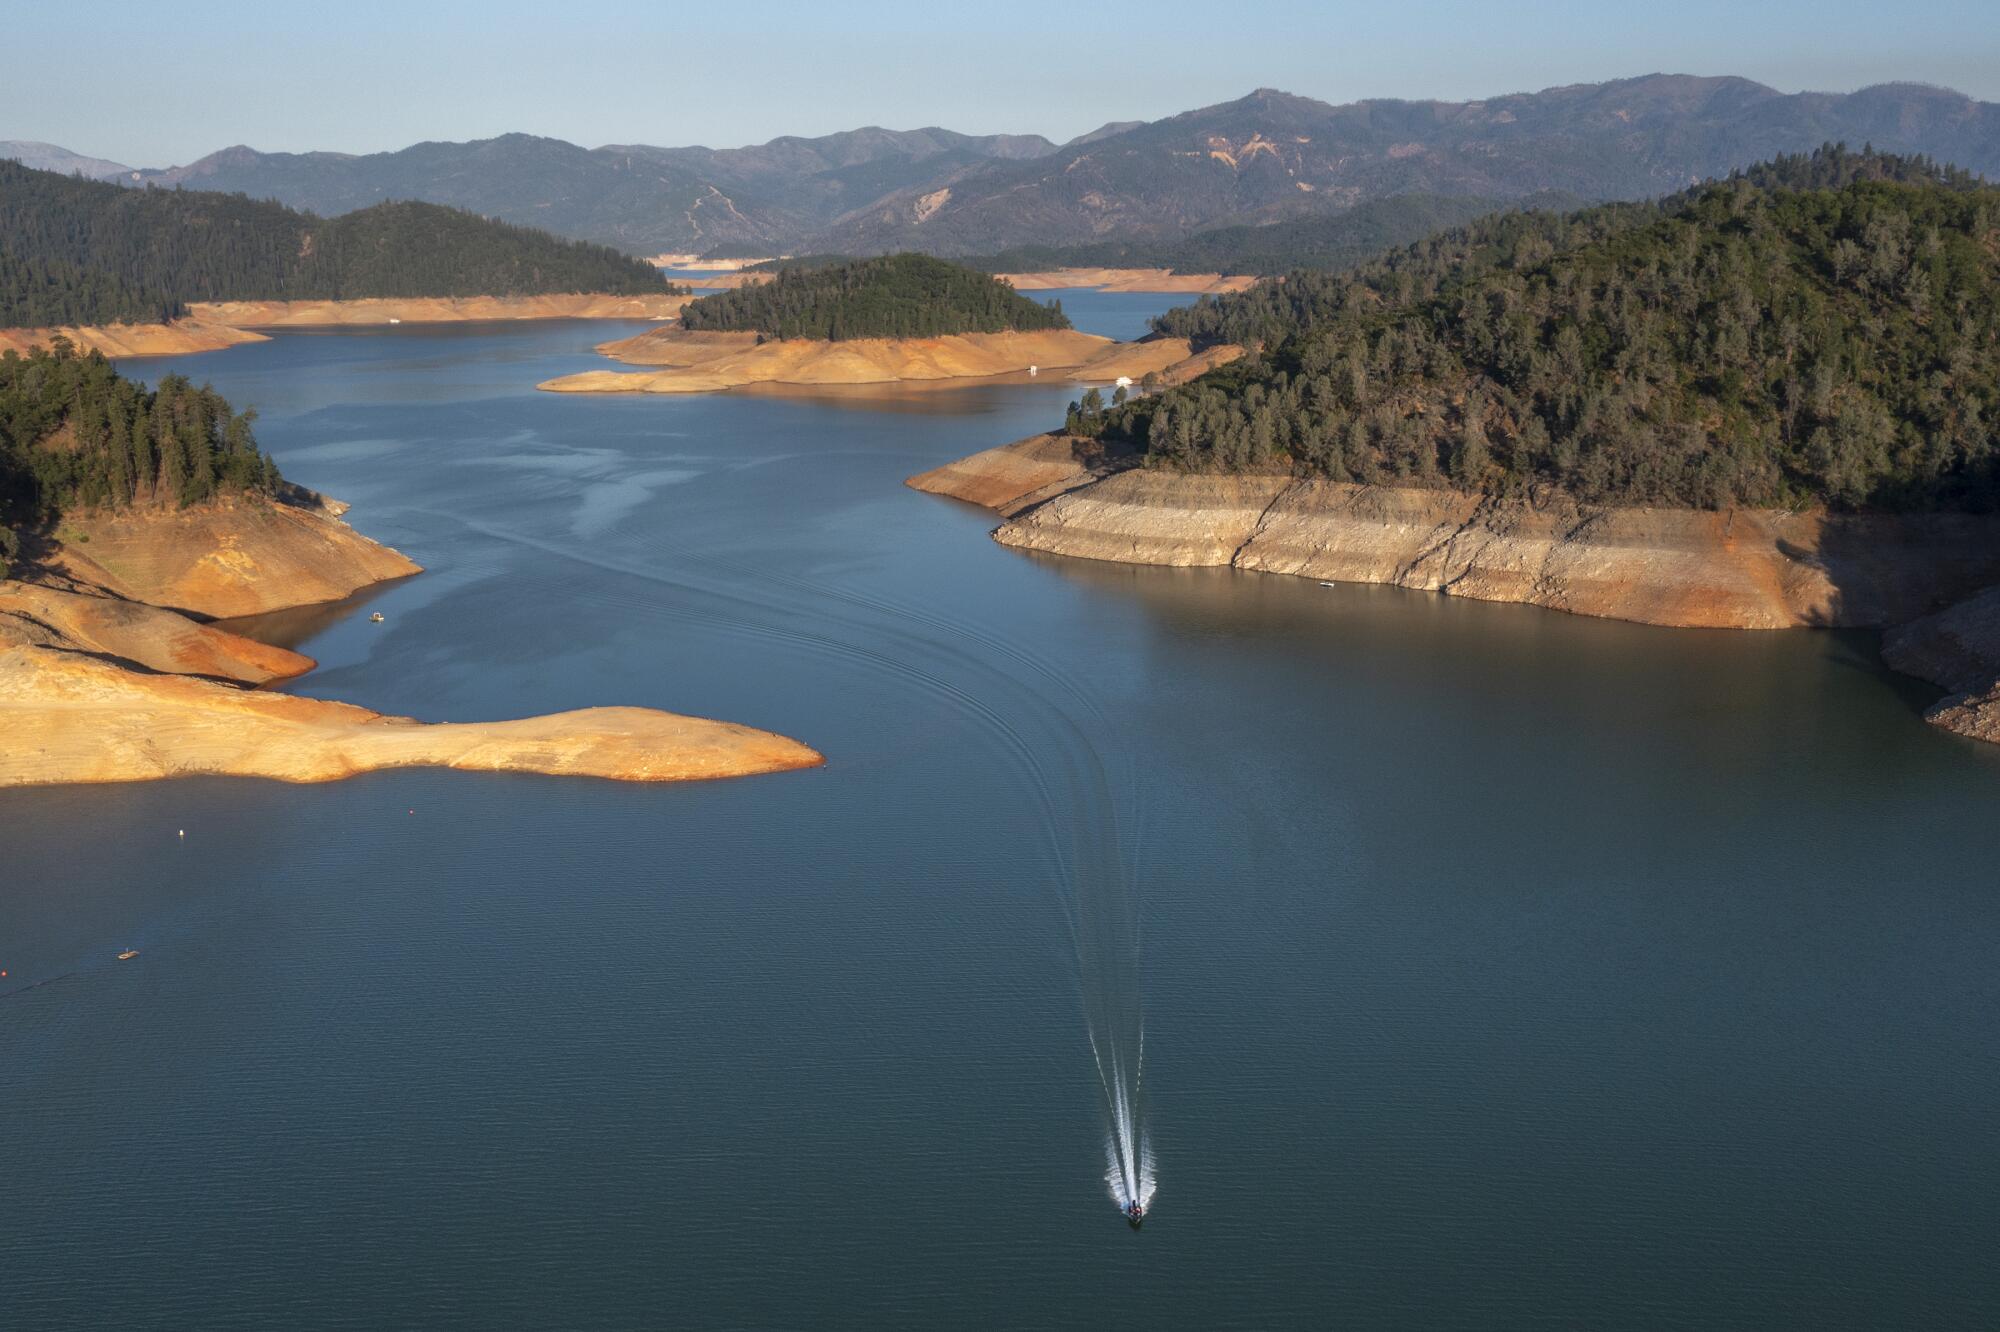 Bare dirt and rocks exposed as the water level has fallen form a "bathtub ring" around Lake Shasta